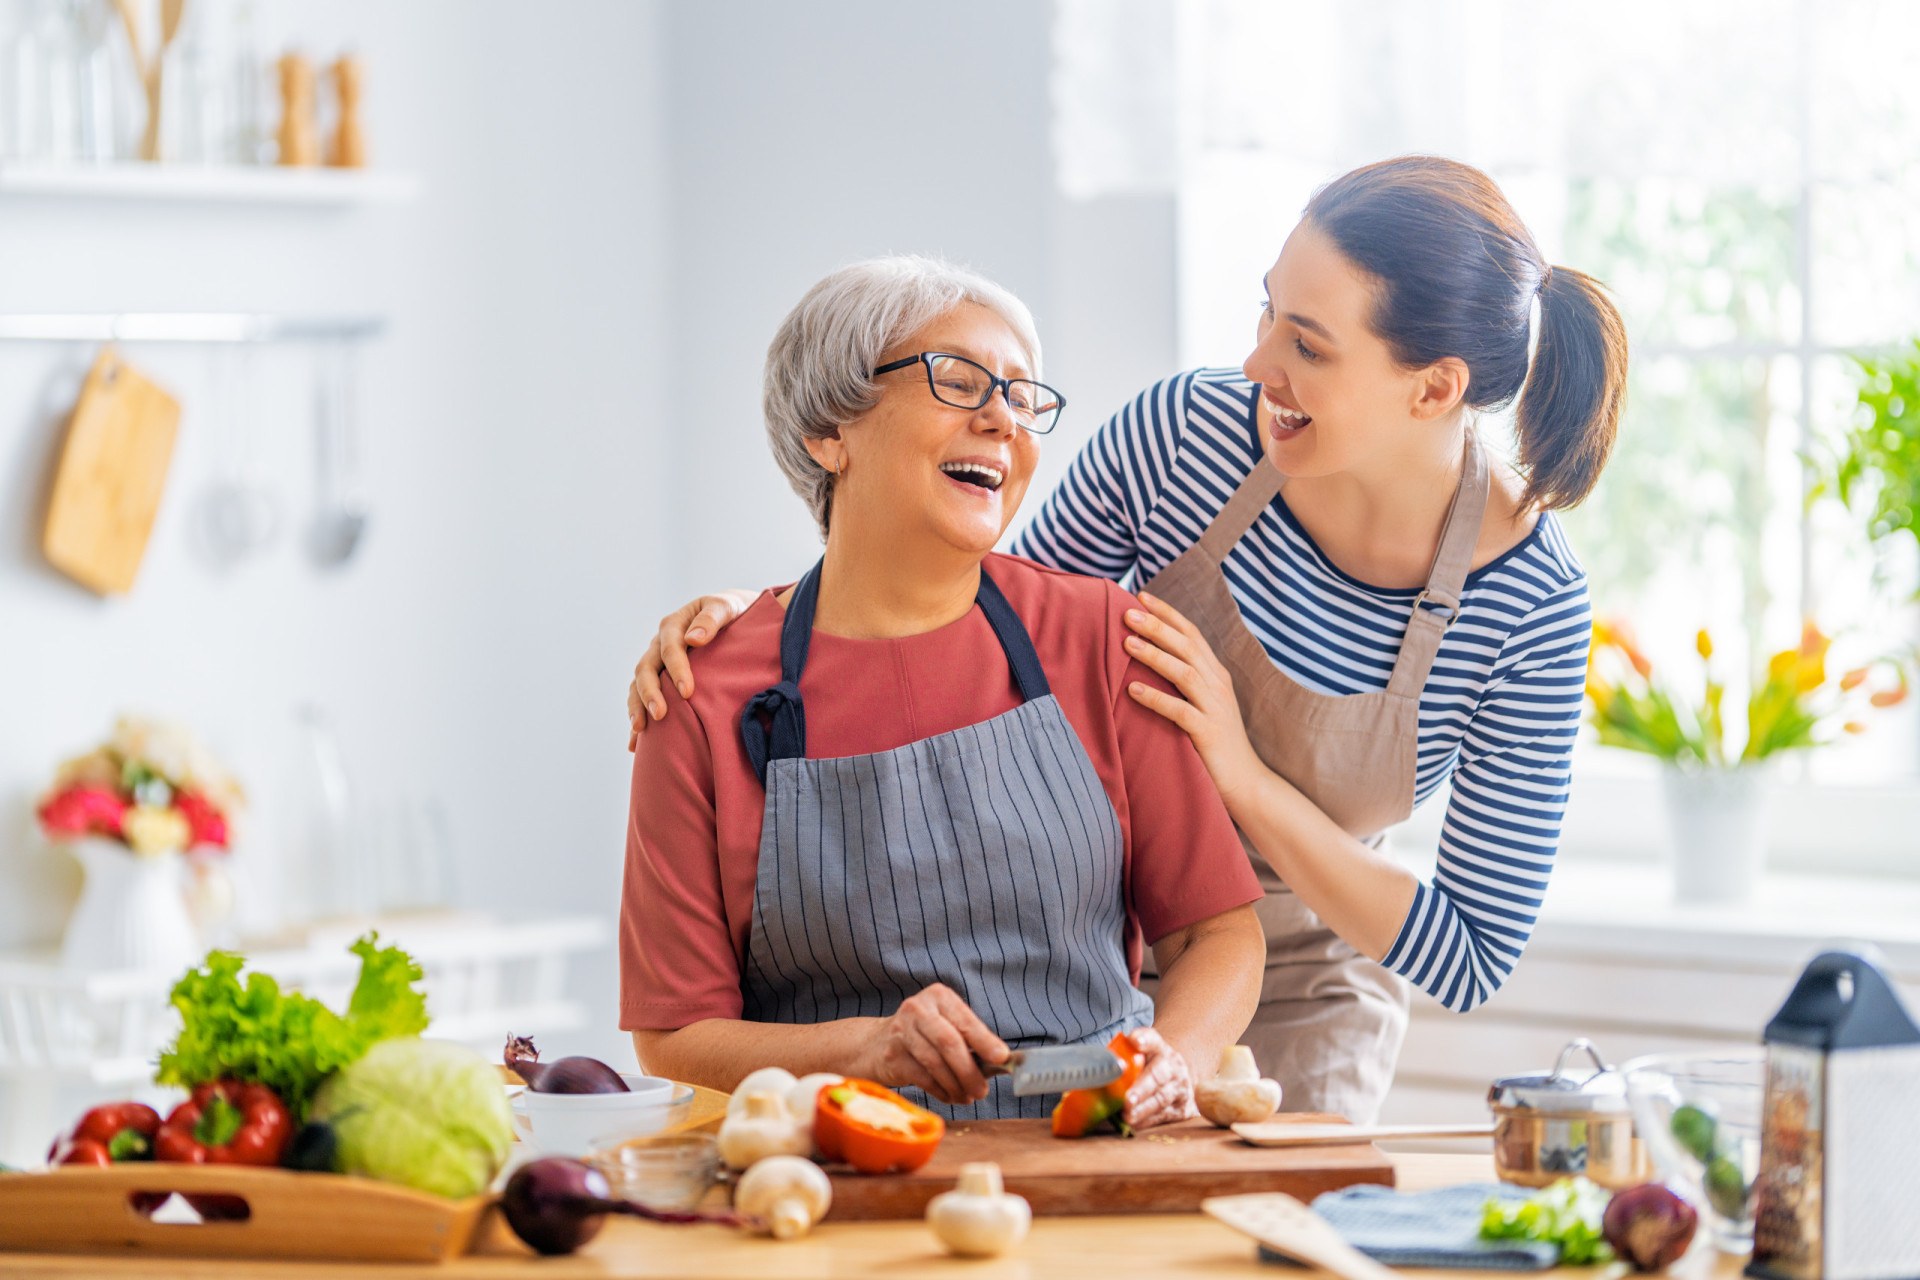 <p>Surprise mom by joining her in the kitchen and preparing a home cooked dinner. From start to finish (yes, even cleaning the dishes) let her dine and unwind in peace.</p><p>You may also like:<a href="https://www.starsinsider.com/n/390504?utm_source=msn.com&utm_medium=display&utm_campaign=referral_description&utm_content=708861en-us"> The secrets behind Robert De Niro's best performances</a></p>